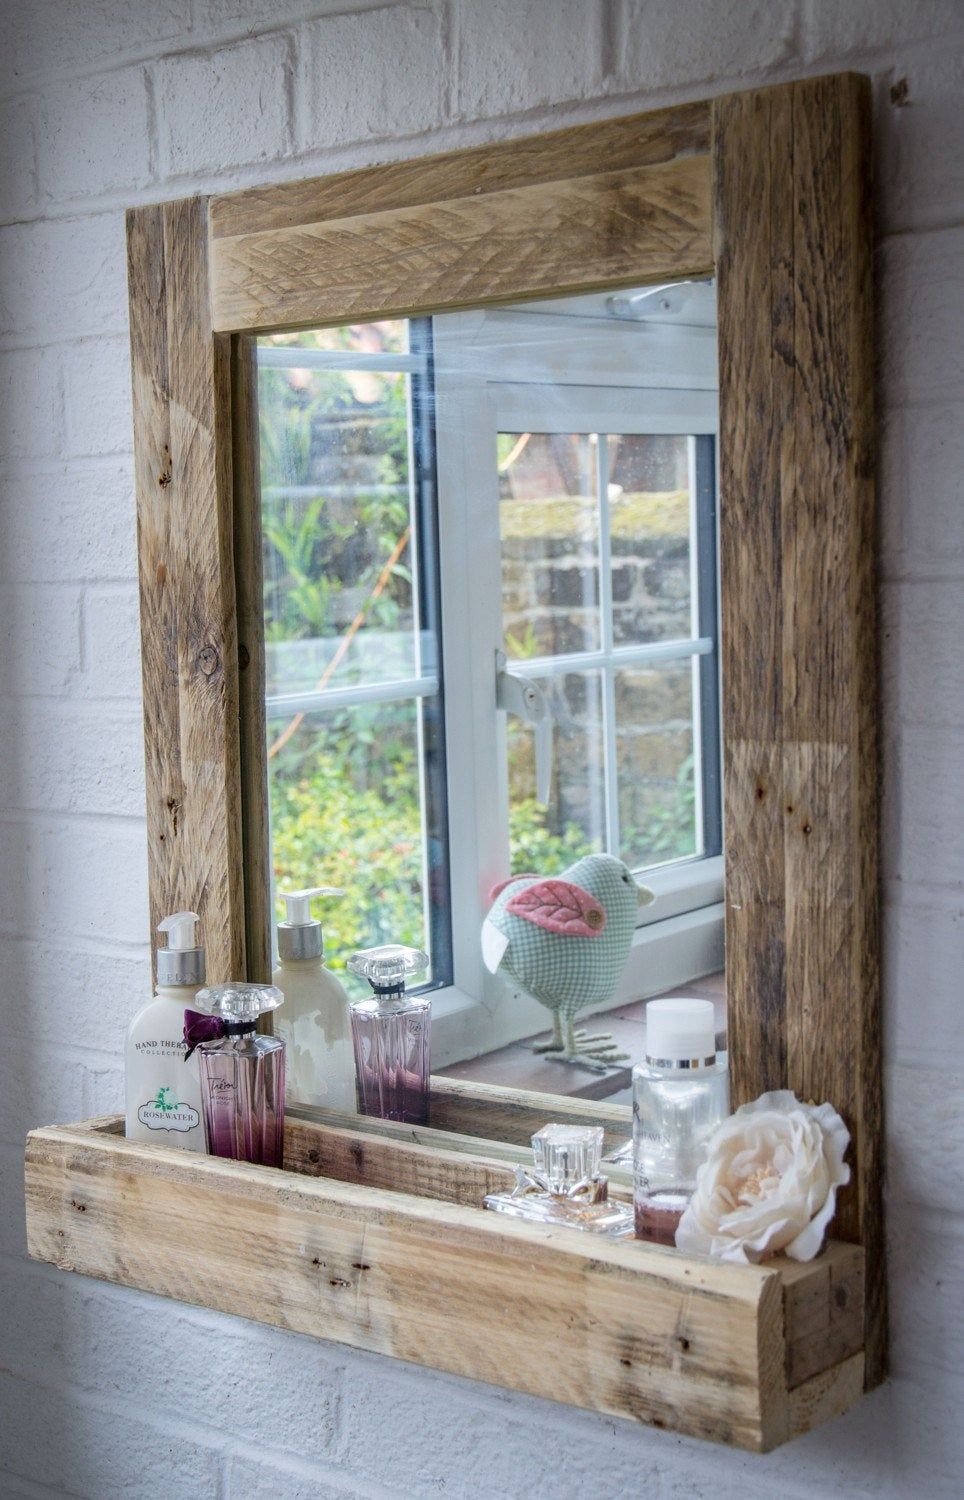 Rustic Bathroom Mirror made from reclaimed pallet wood - Rustic Bathroom Mirror made from reclaimed pallet wood -   16 diy Bathroom pallet ideas